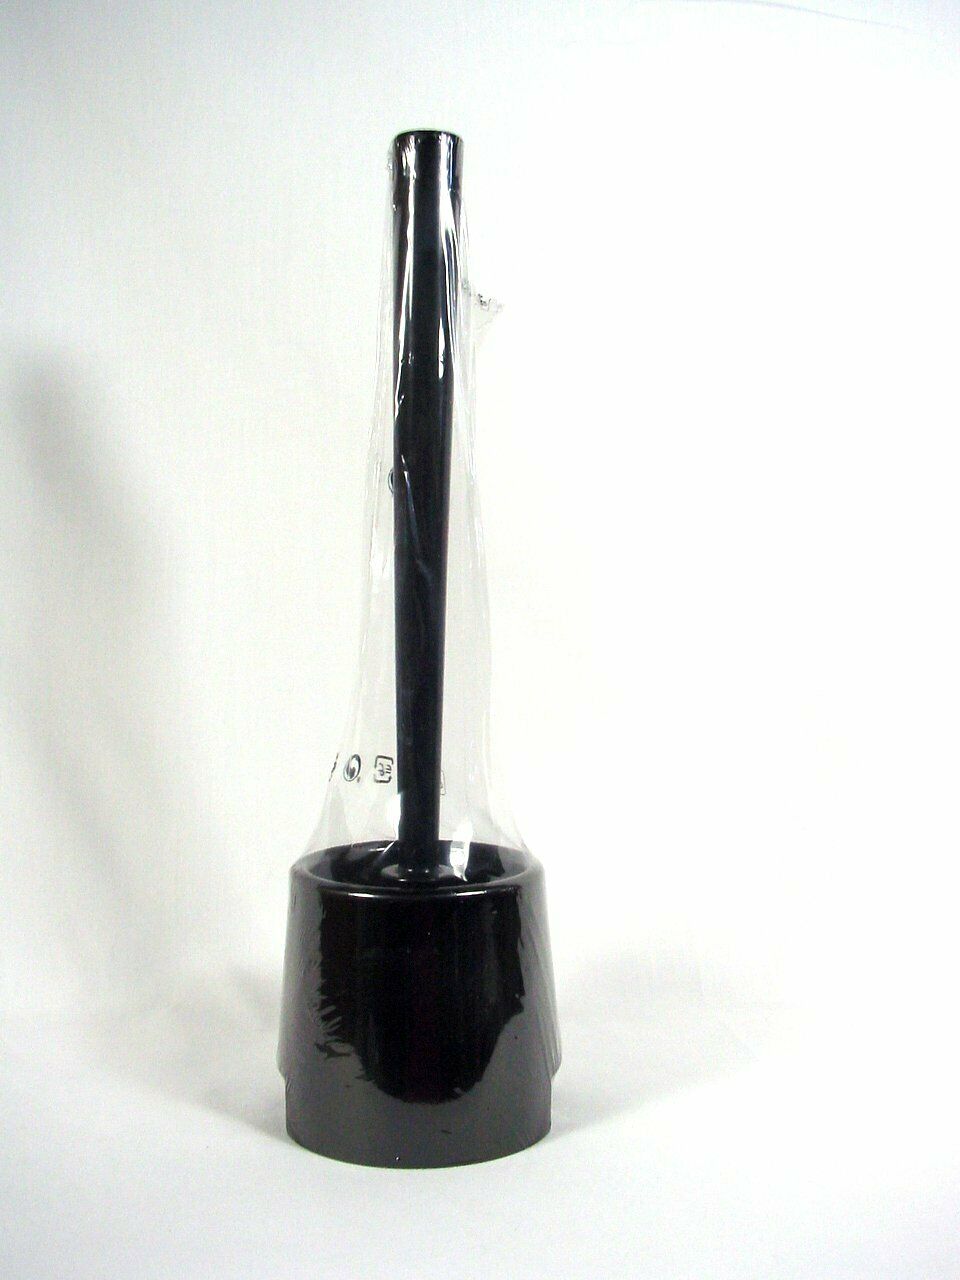 Ikea Bolmen Toilet Brush With Holder Black Color Free Shipping Fast Handling